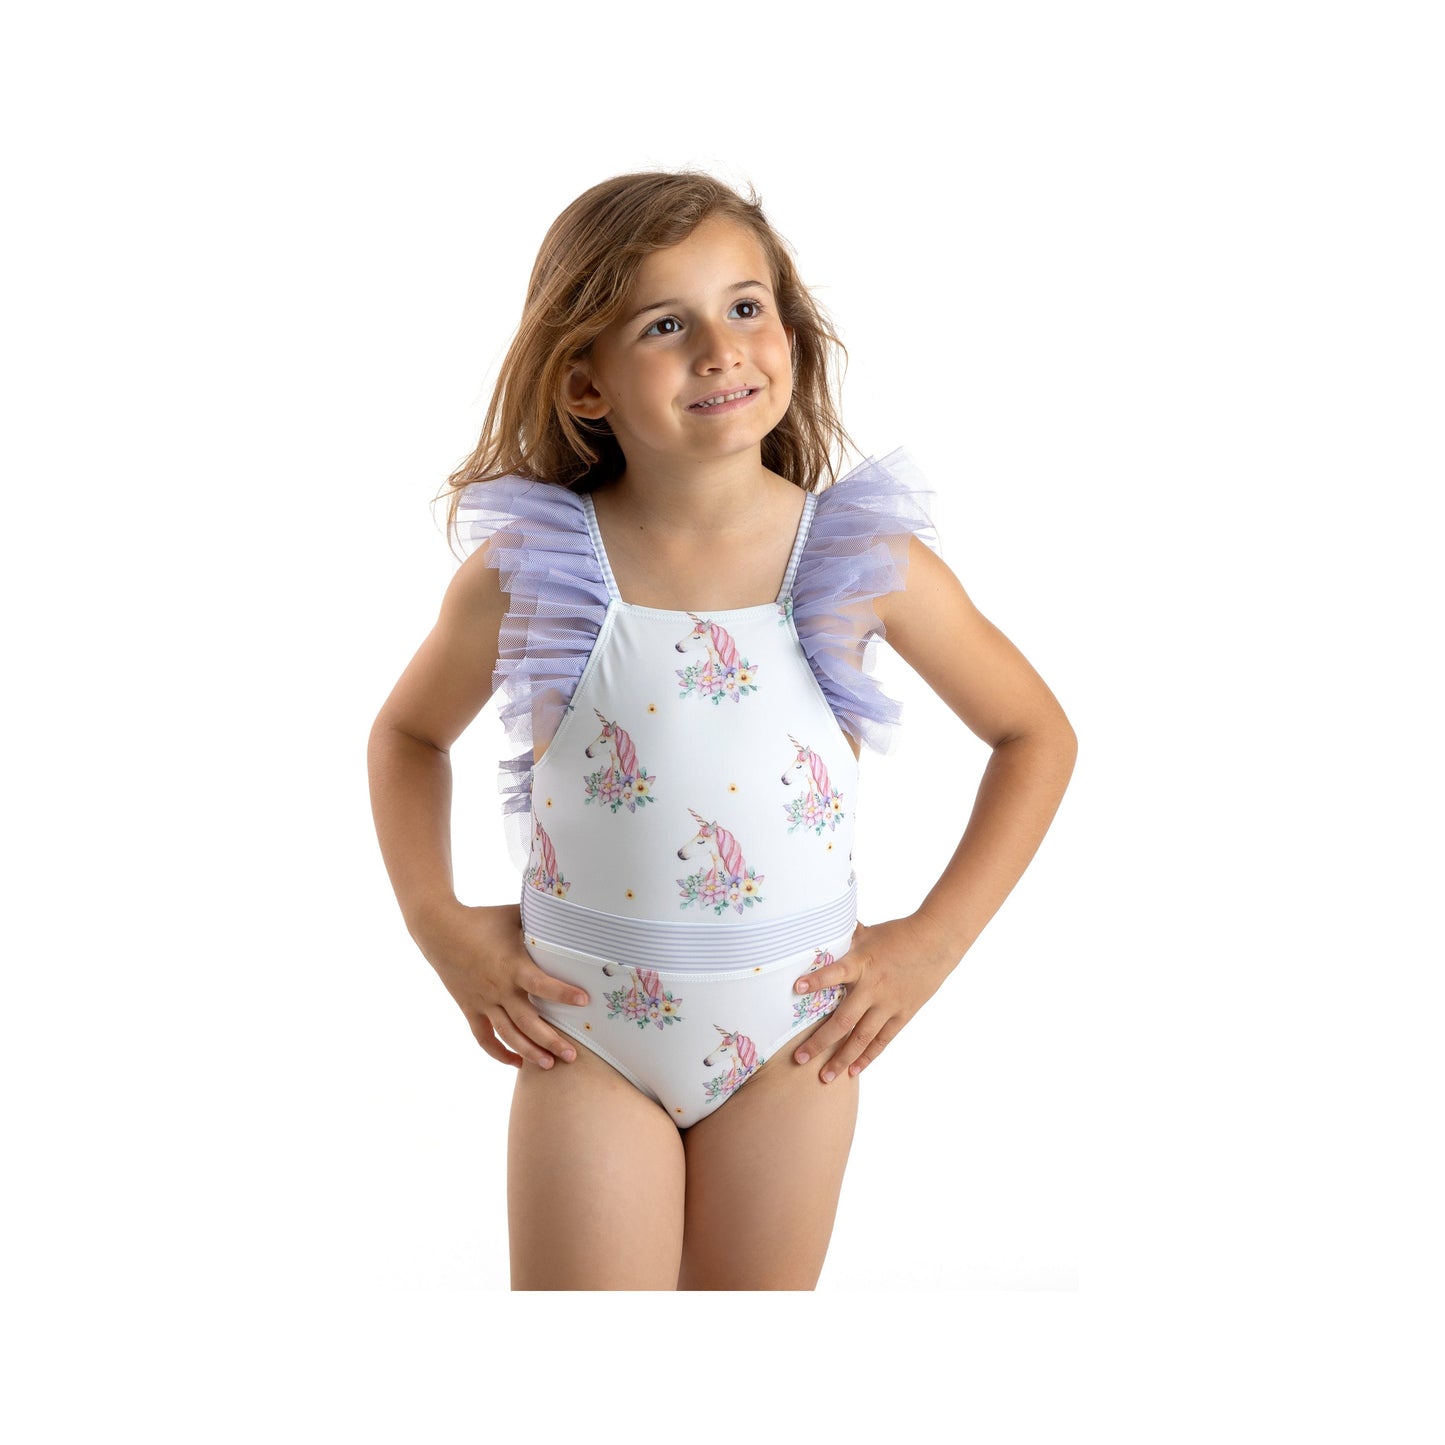 Load image into Gallery viewer, Kids designer swimming costume from Meia Pata - Adora
